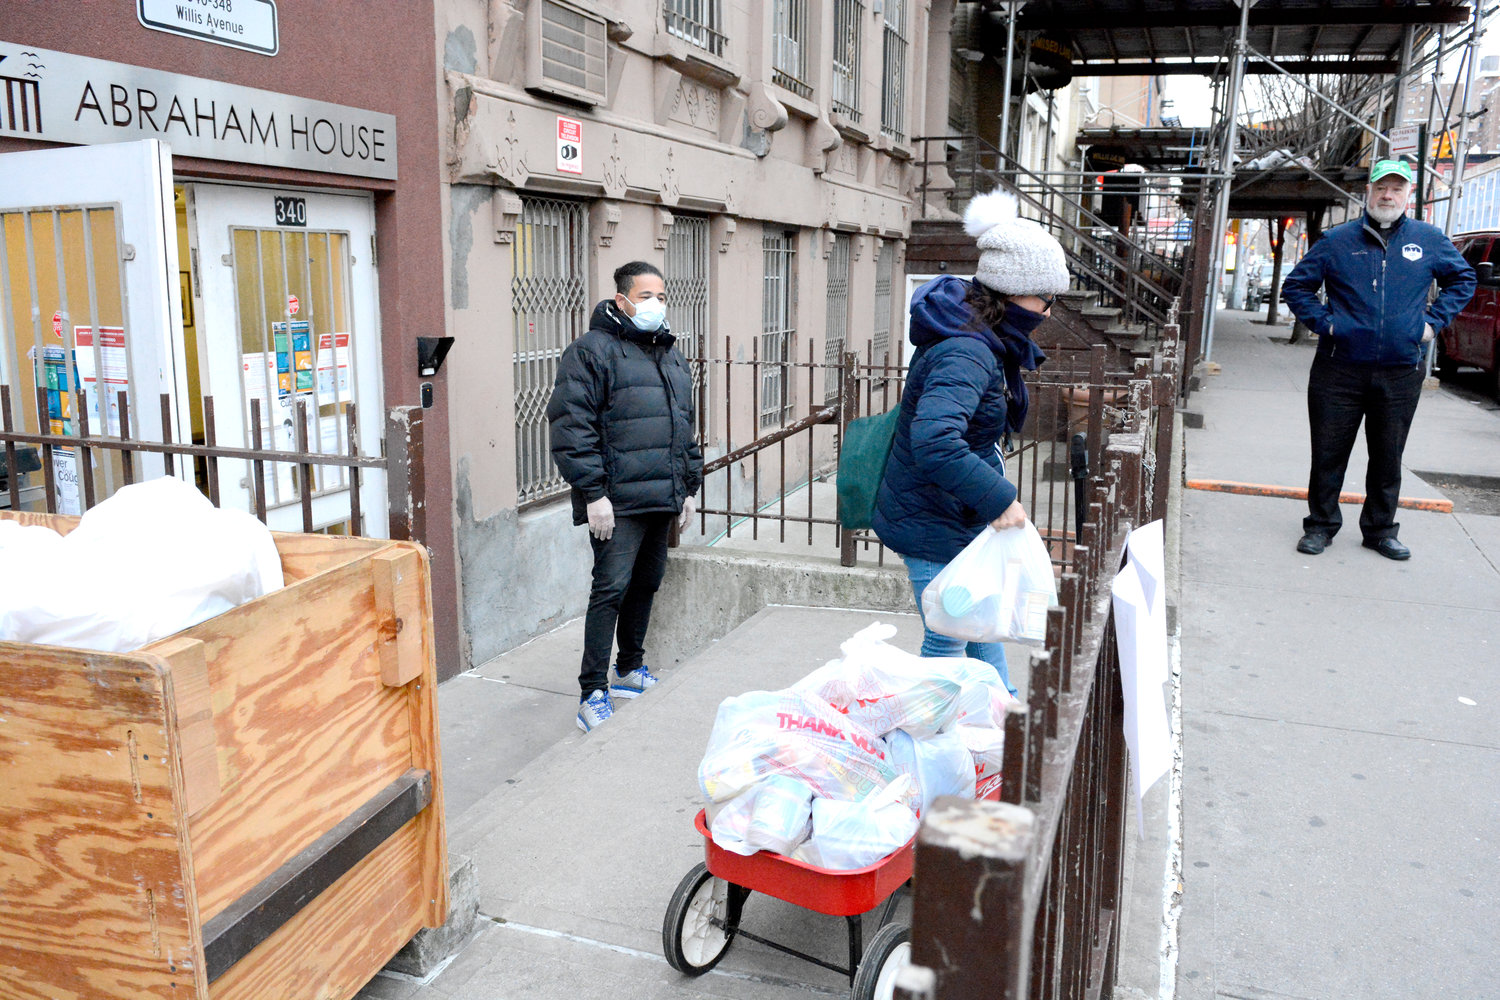 OUTSIDE PANTRY—A woman carries a bag of food outside Abraham House in the Bronx, where a “grab-and-go” pantry was set up March 21. Looking on from the sidewalk was Msgr. Kevin Sullivan, executive director of Catholic Charities. Residential assistant Andres Fernandez, wearing mask, maintains proper social distancing.